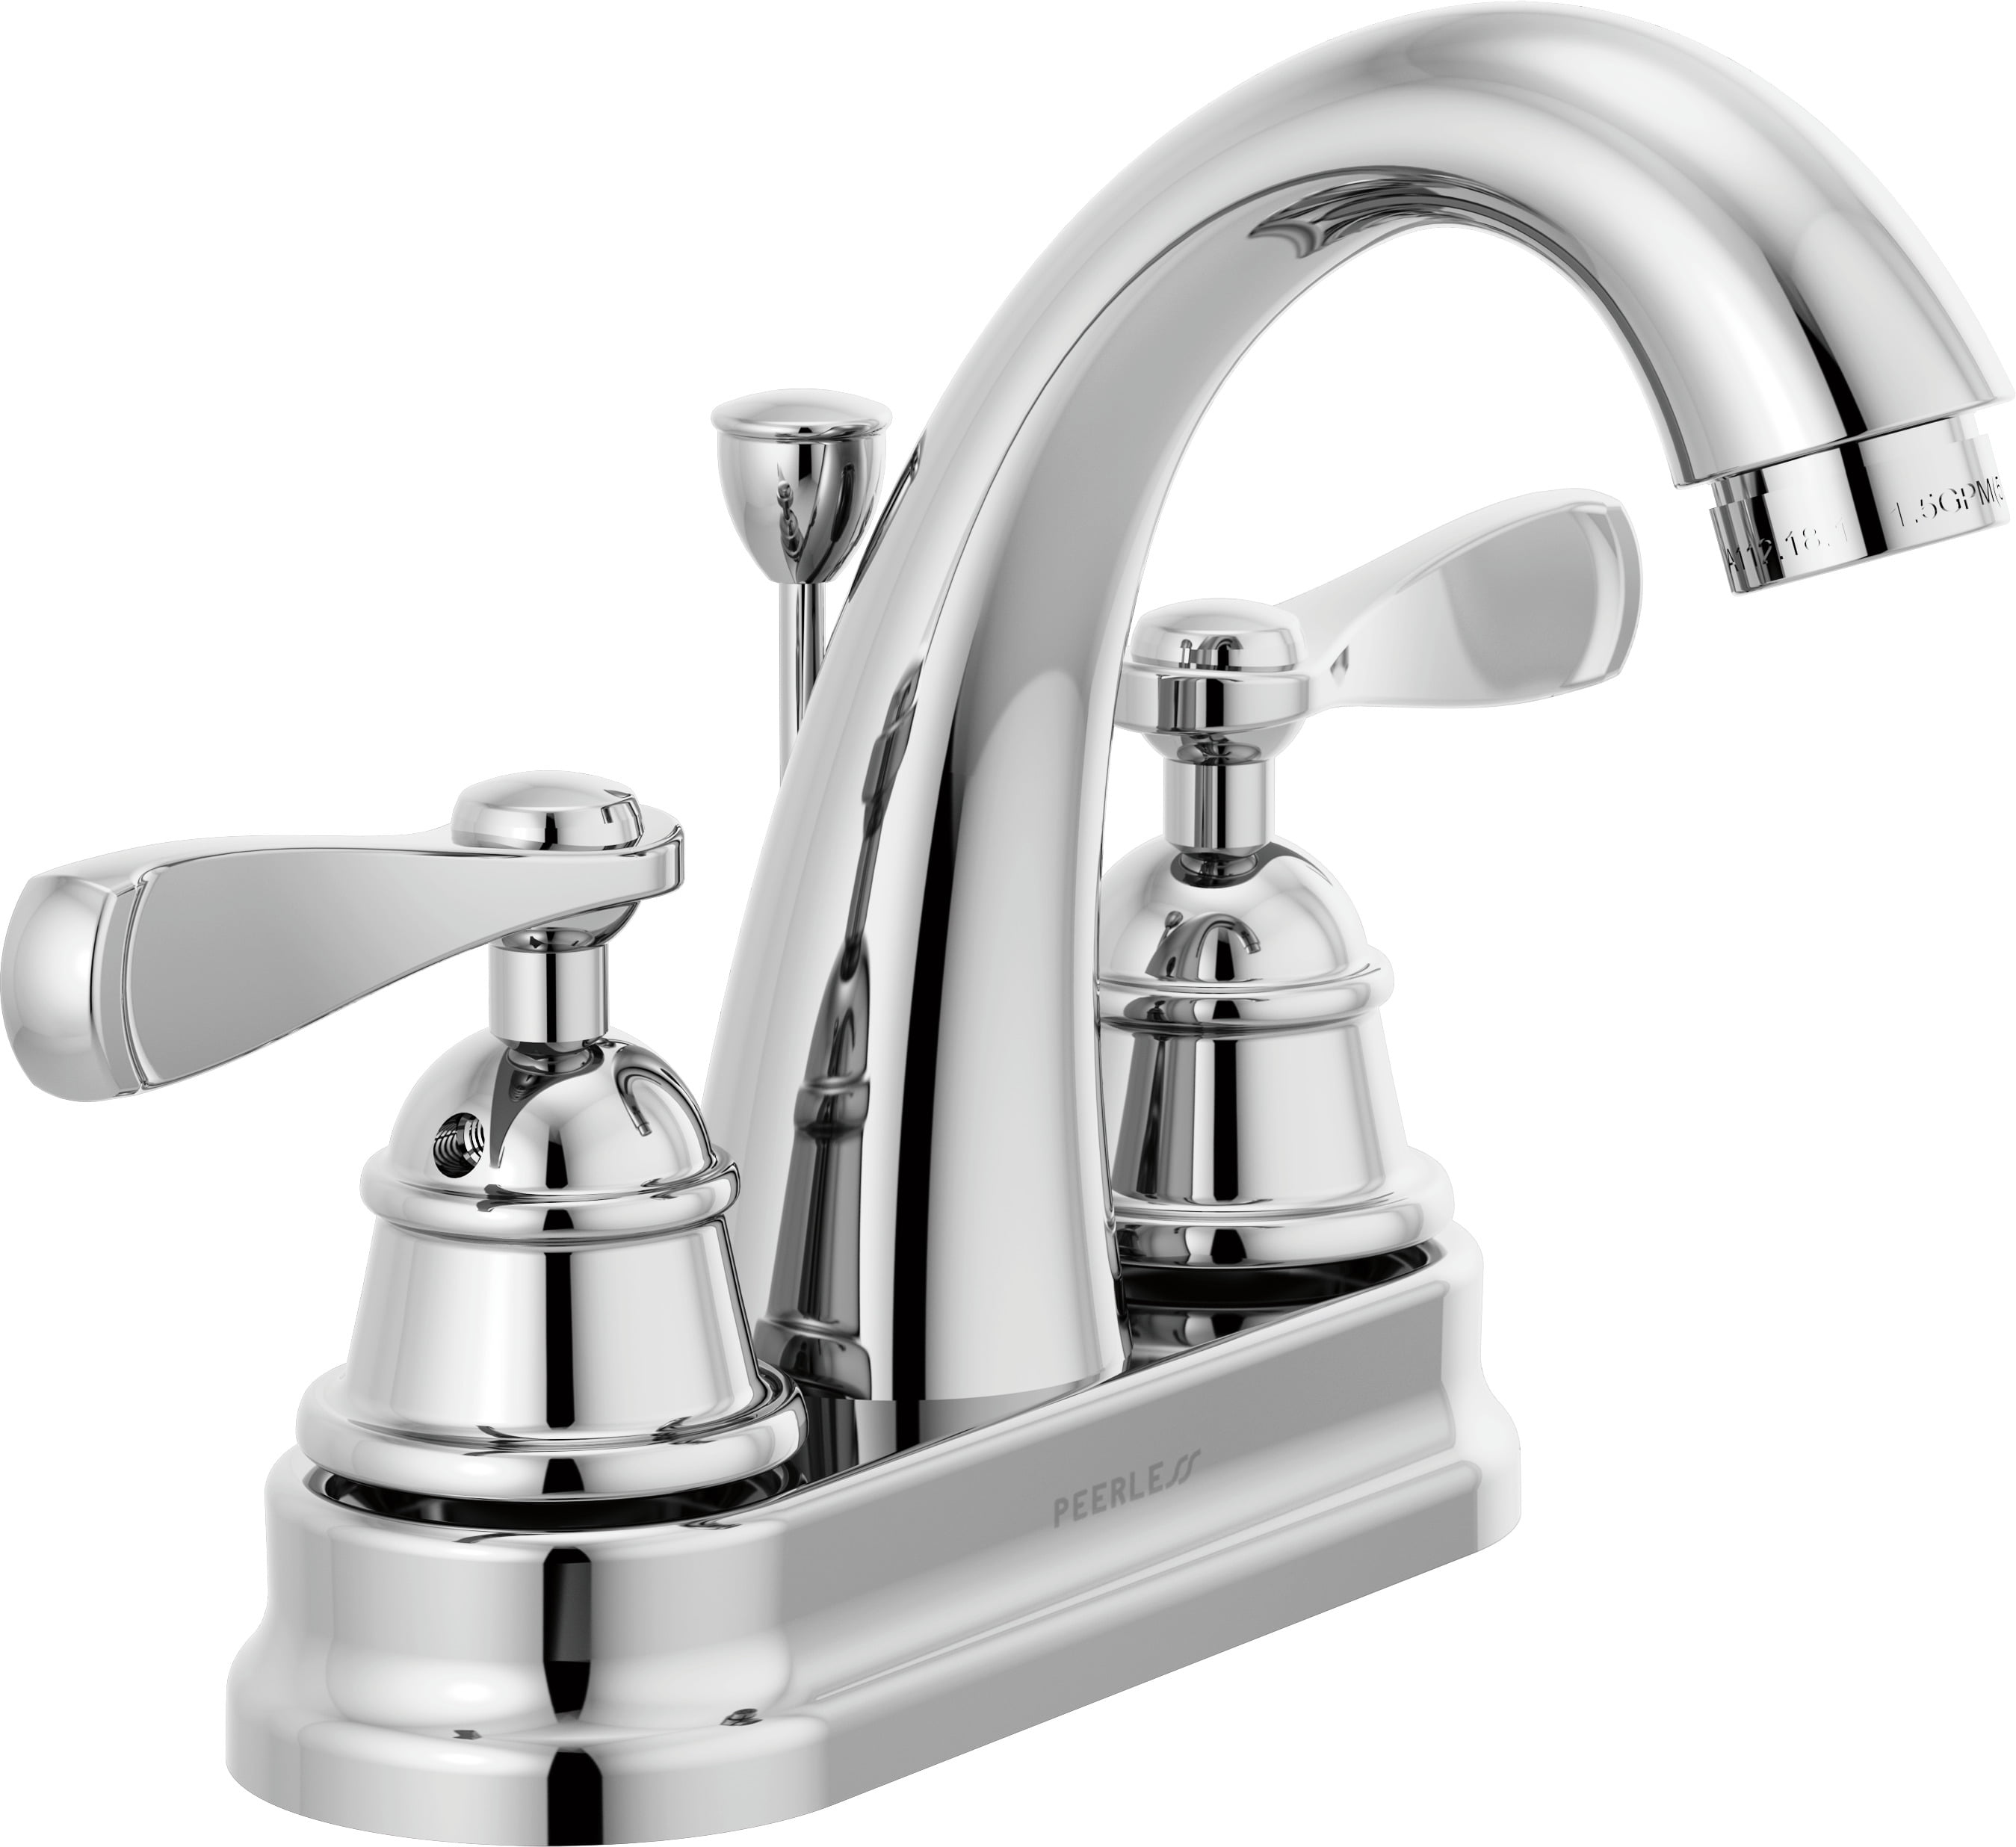 Peerless Choice Centerset Two Handle Bathroom Faucet in Chrome for sale online 